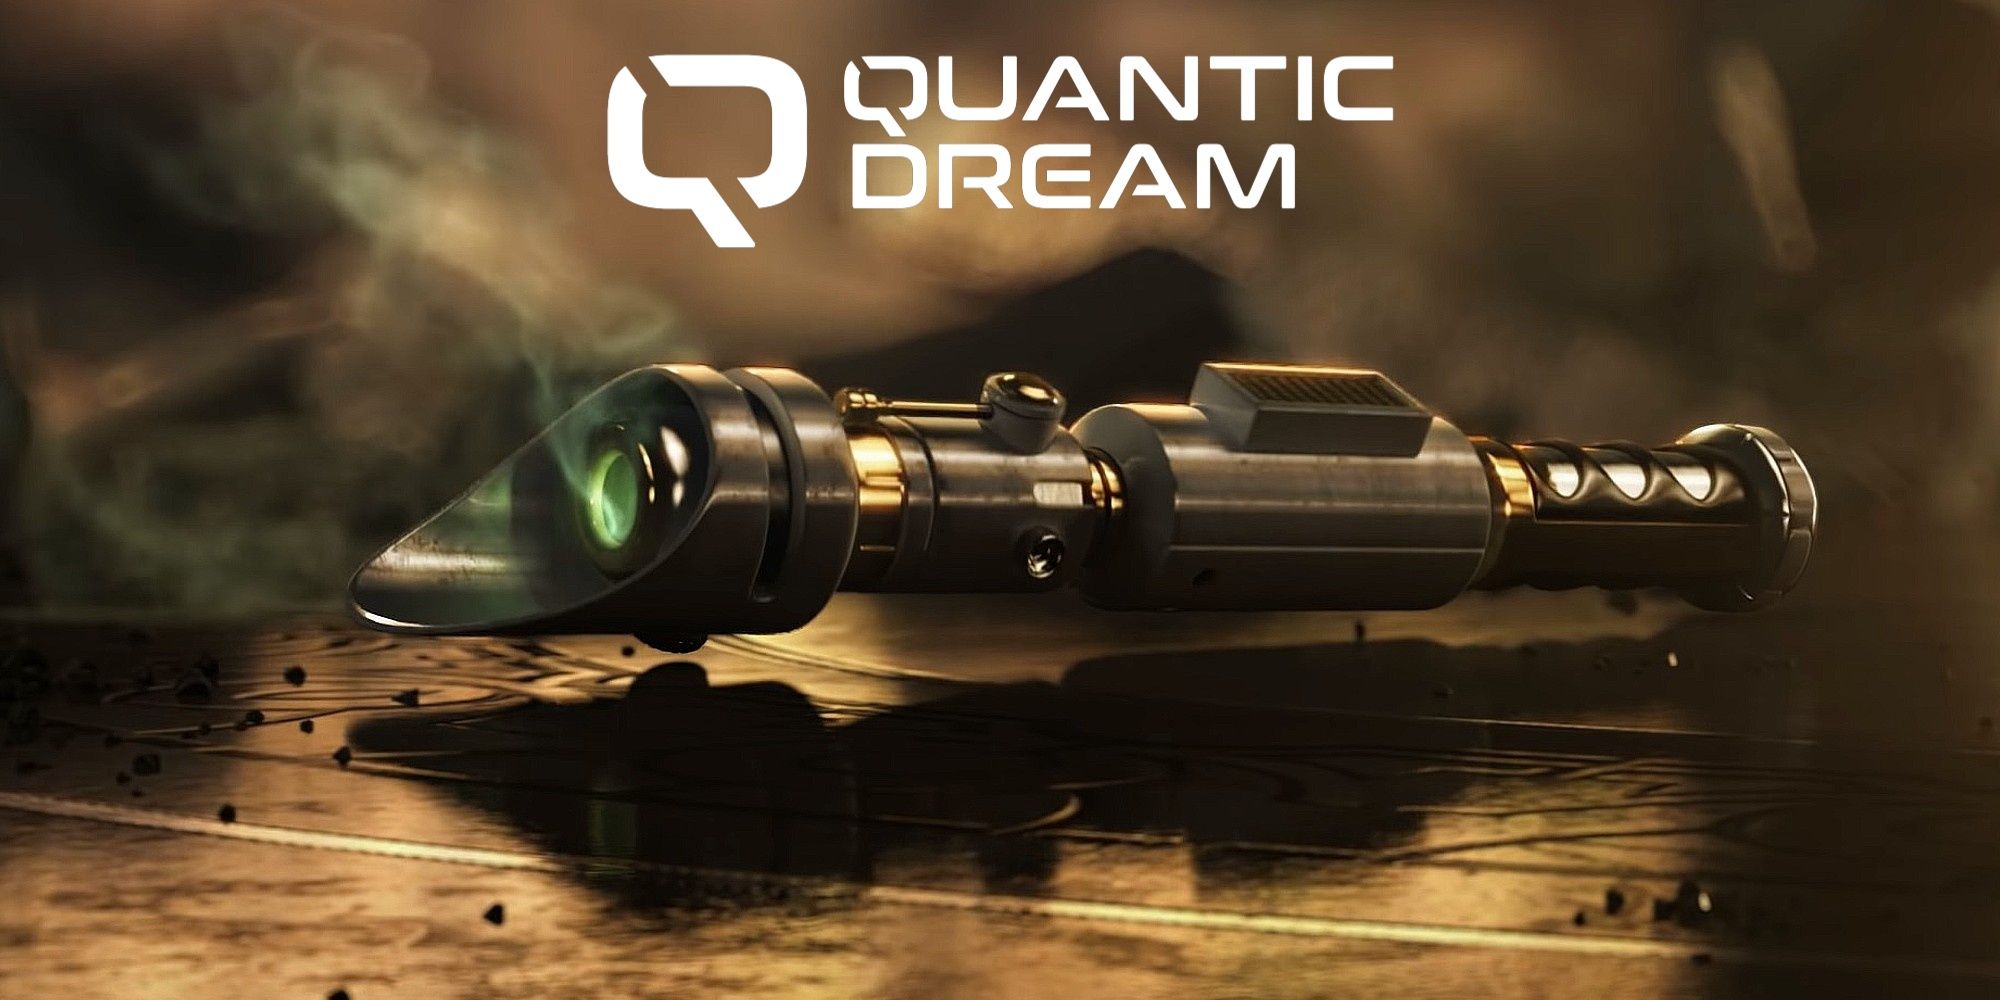 Rumor: Quantic Dream Star Wars Game Has Been In the Works for 18